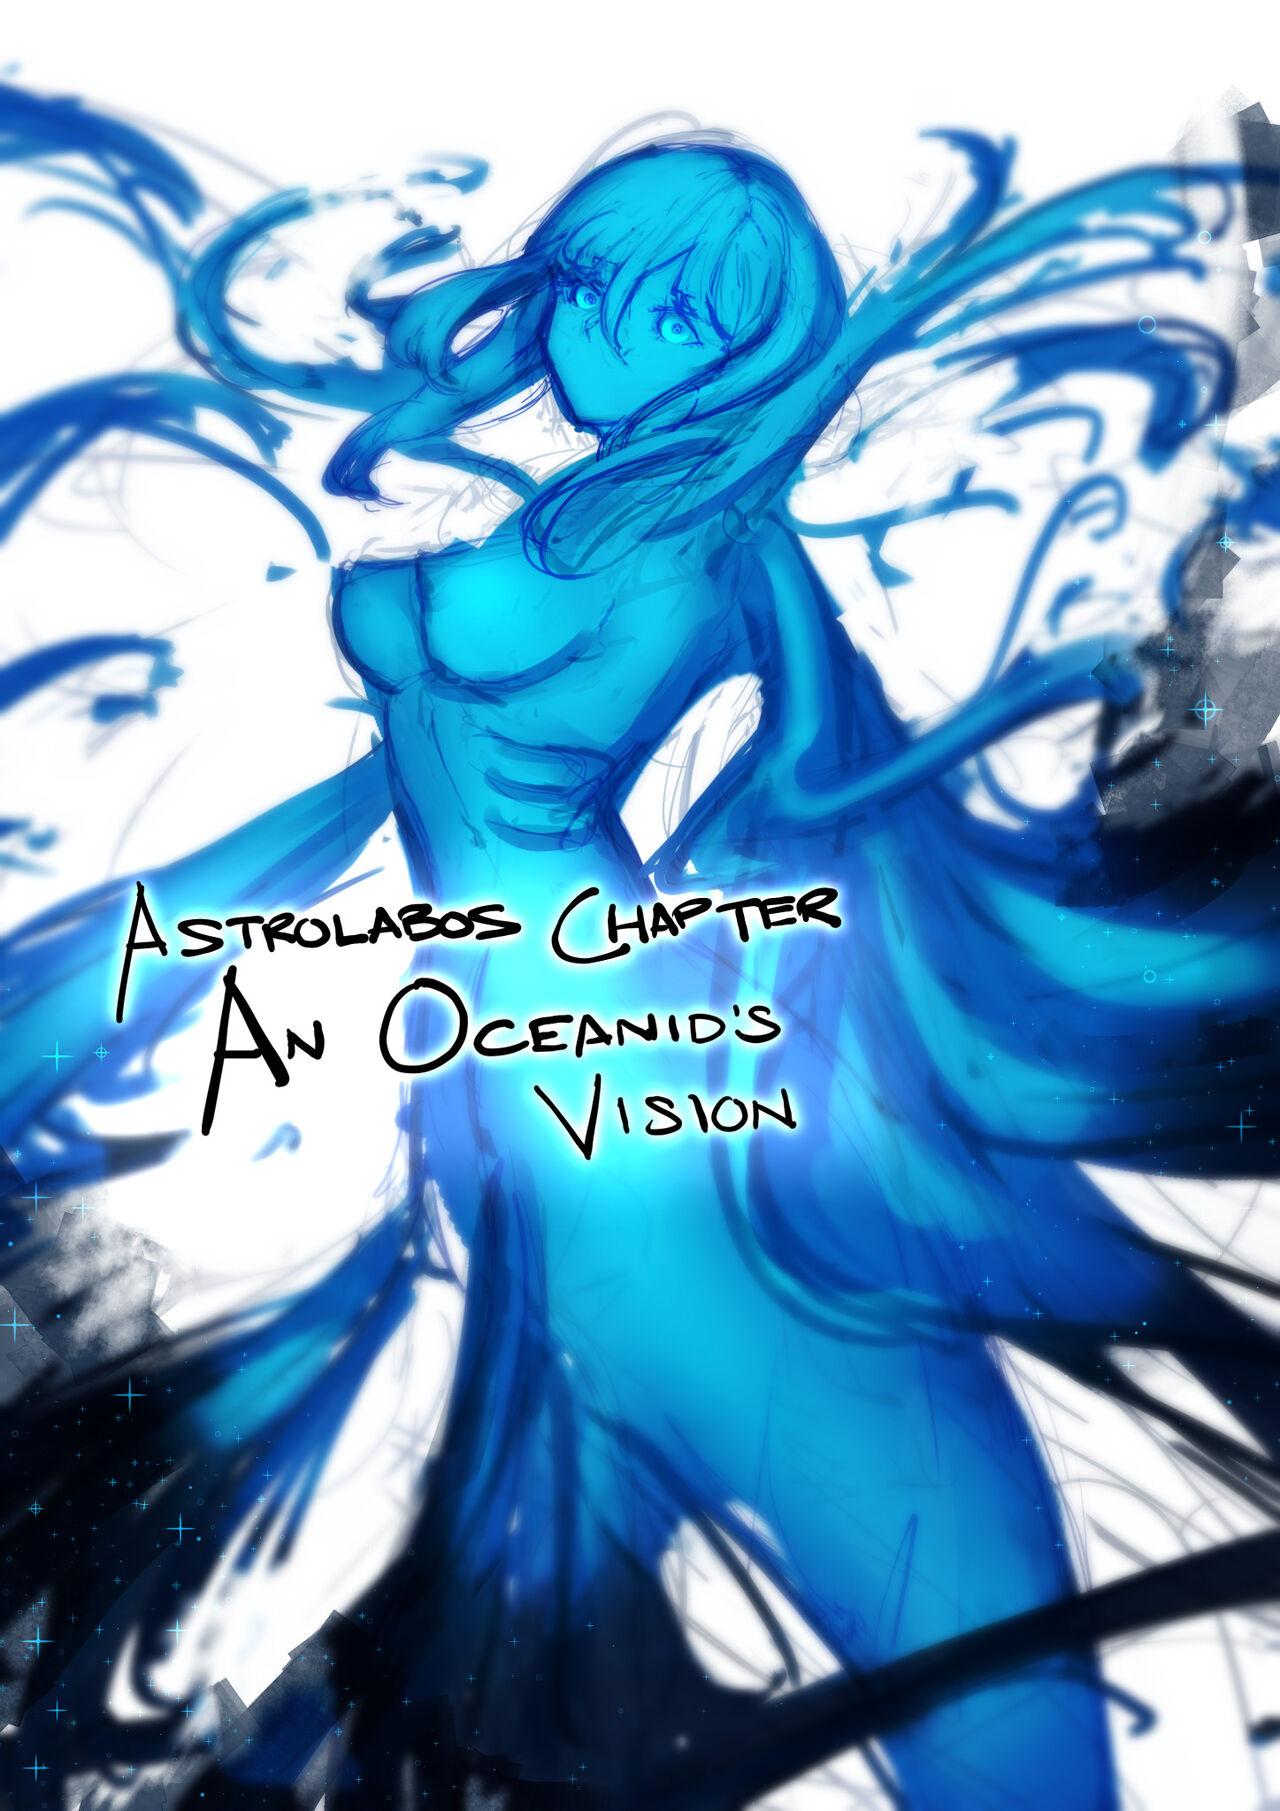 Mmf Astrolabos chapter- side act: An Oceanid’s vision Hair - Page 1